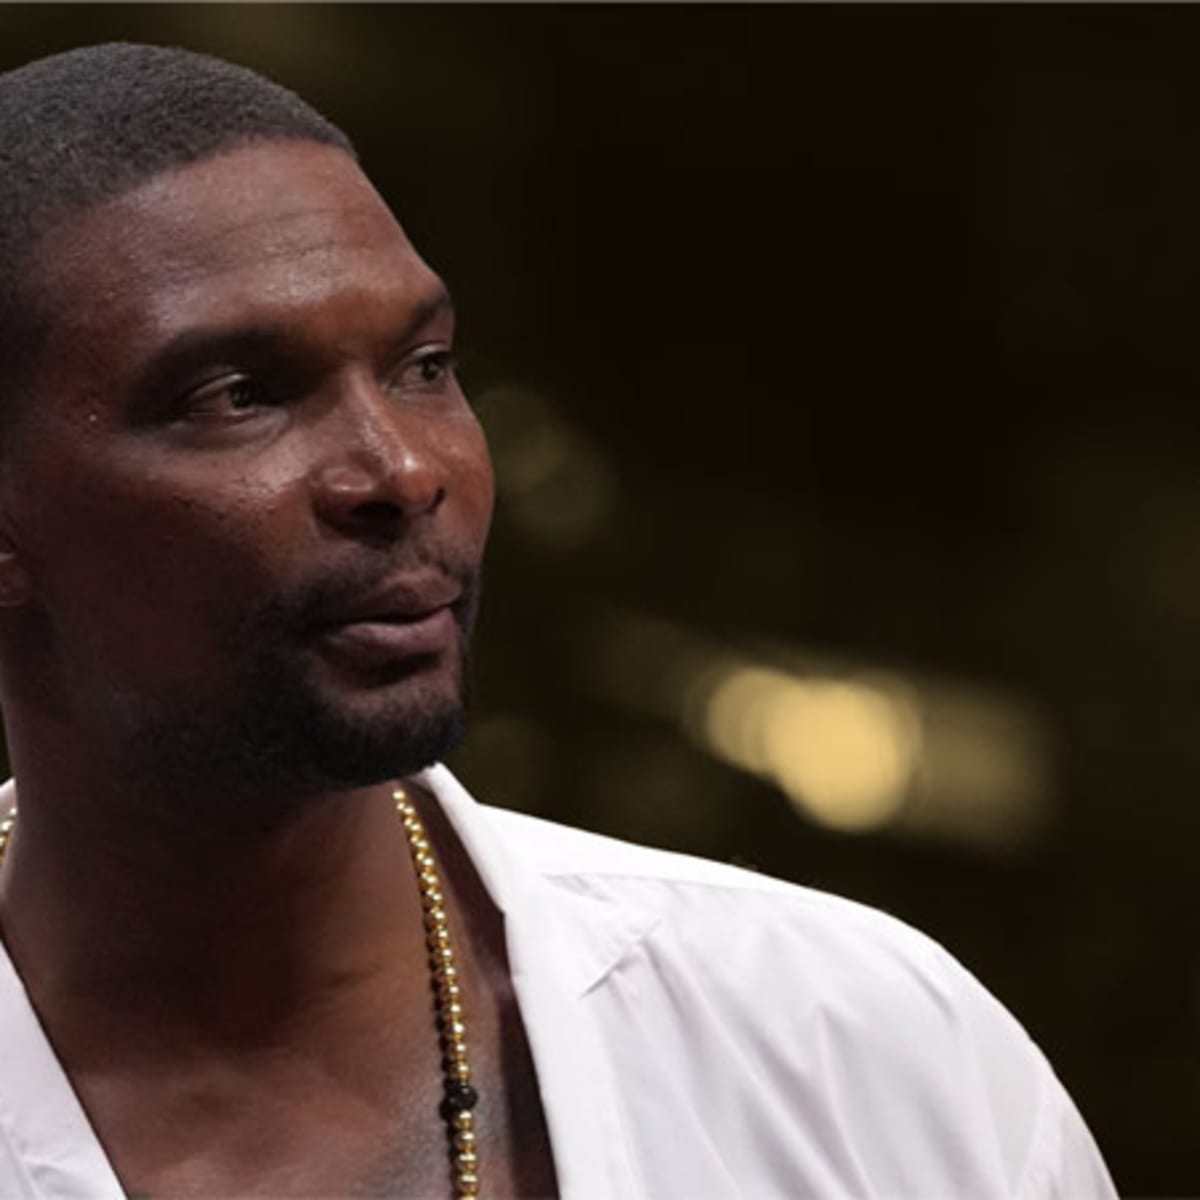 While Chris Bosh still wants an NBA gig, he's trying a new sport